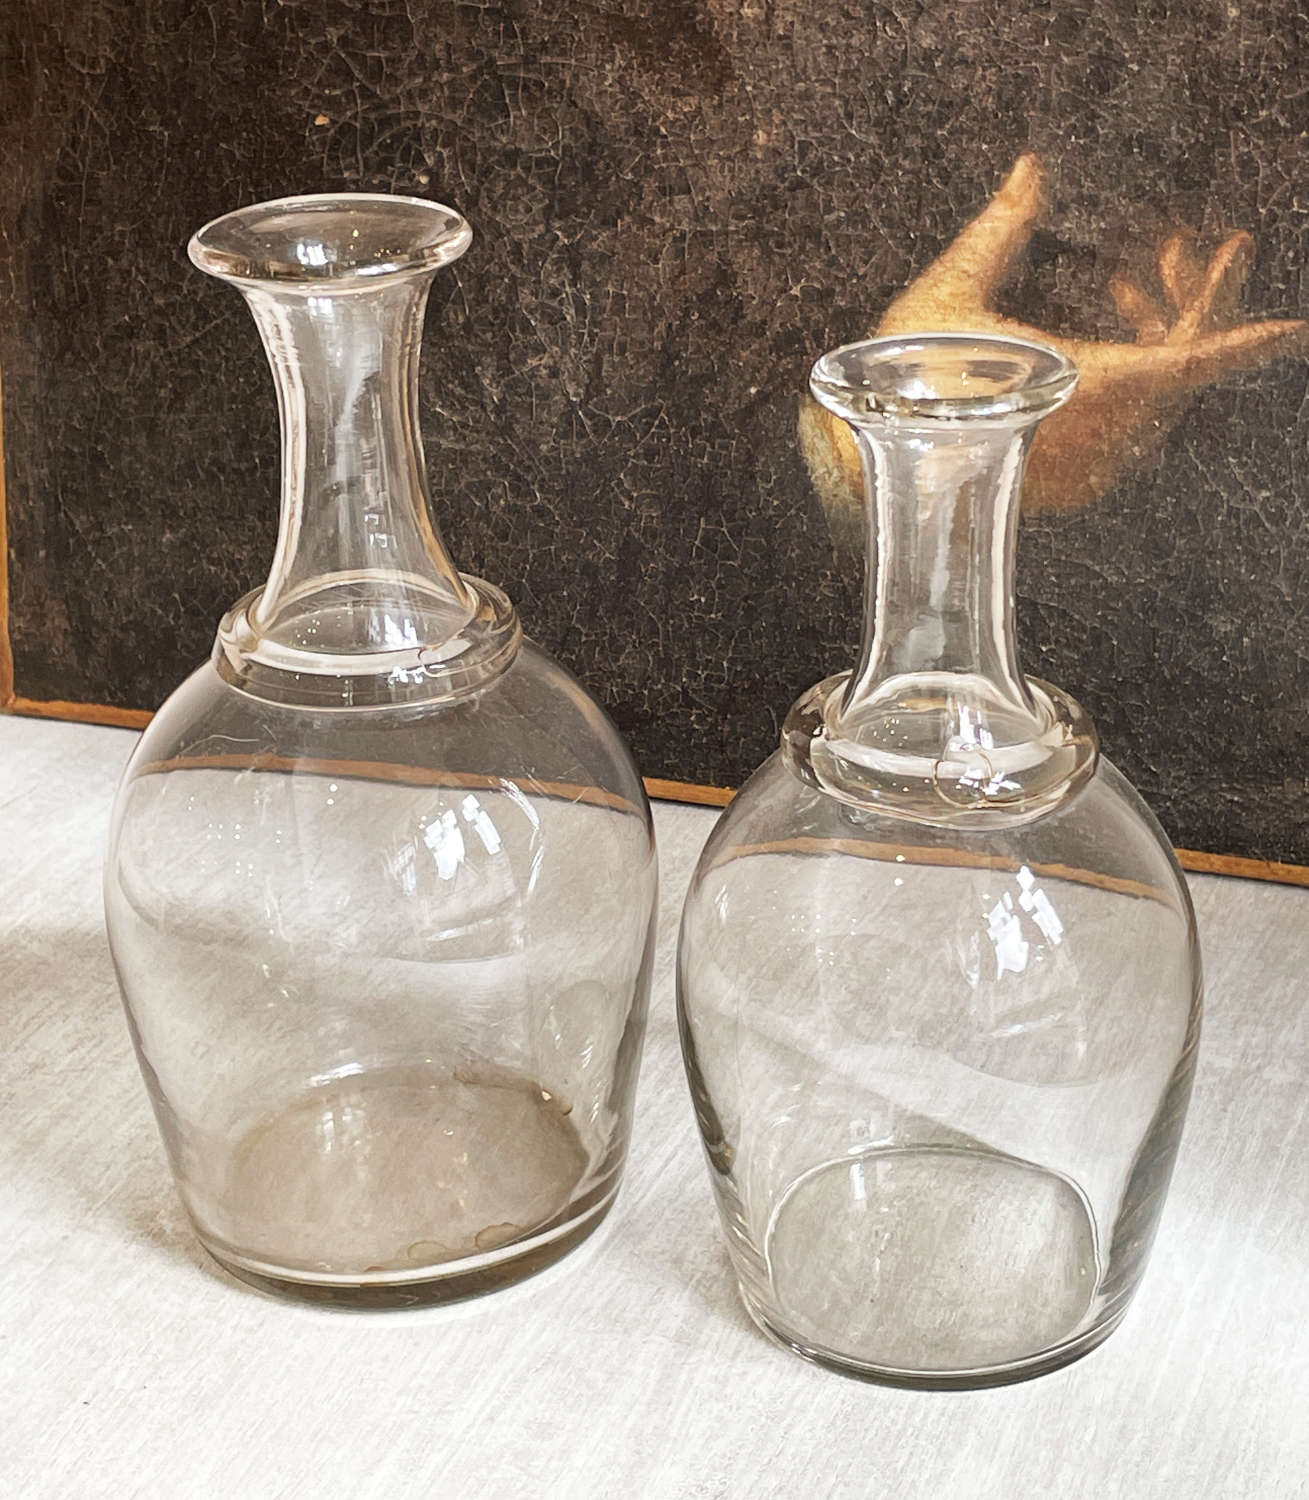 Two superb hand-blown 19th c French Cider Carafes - circa 1870